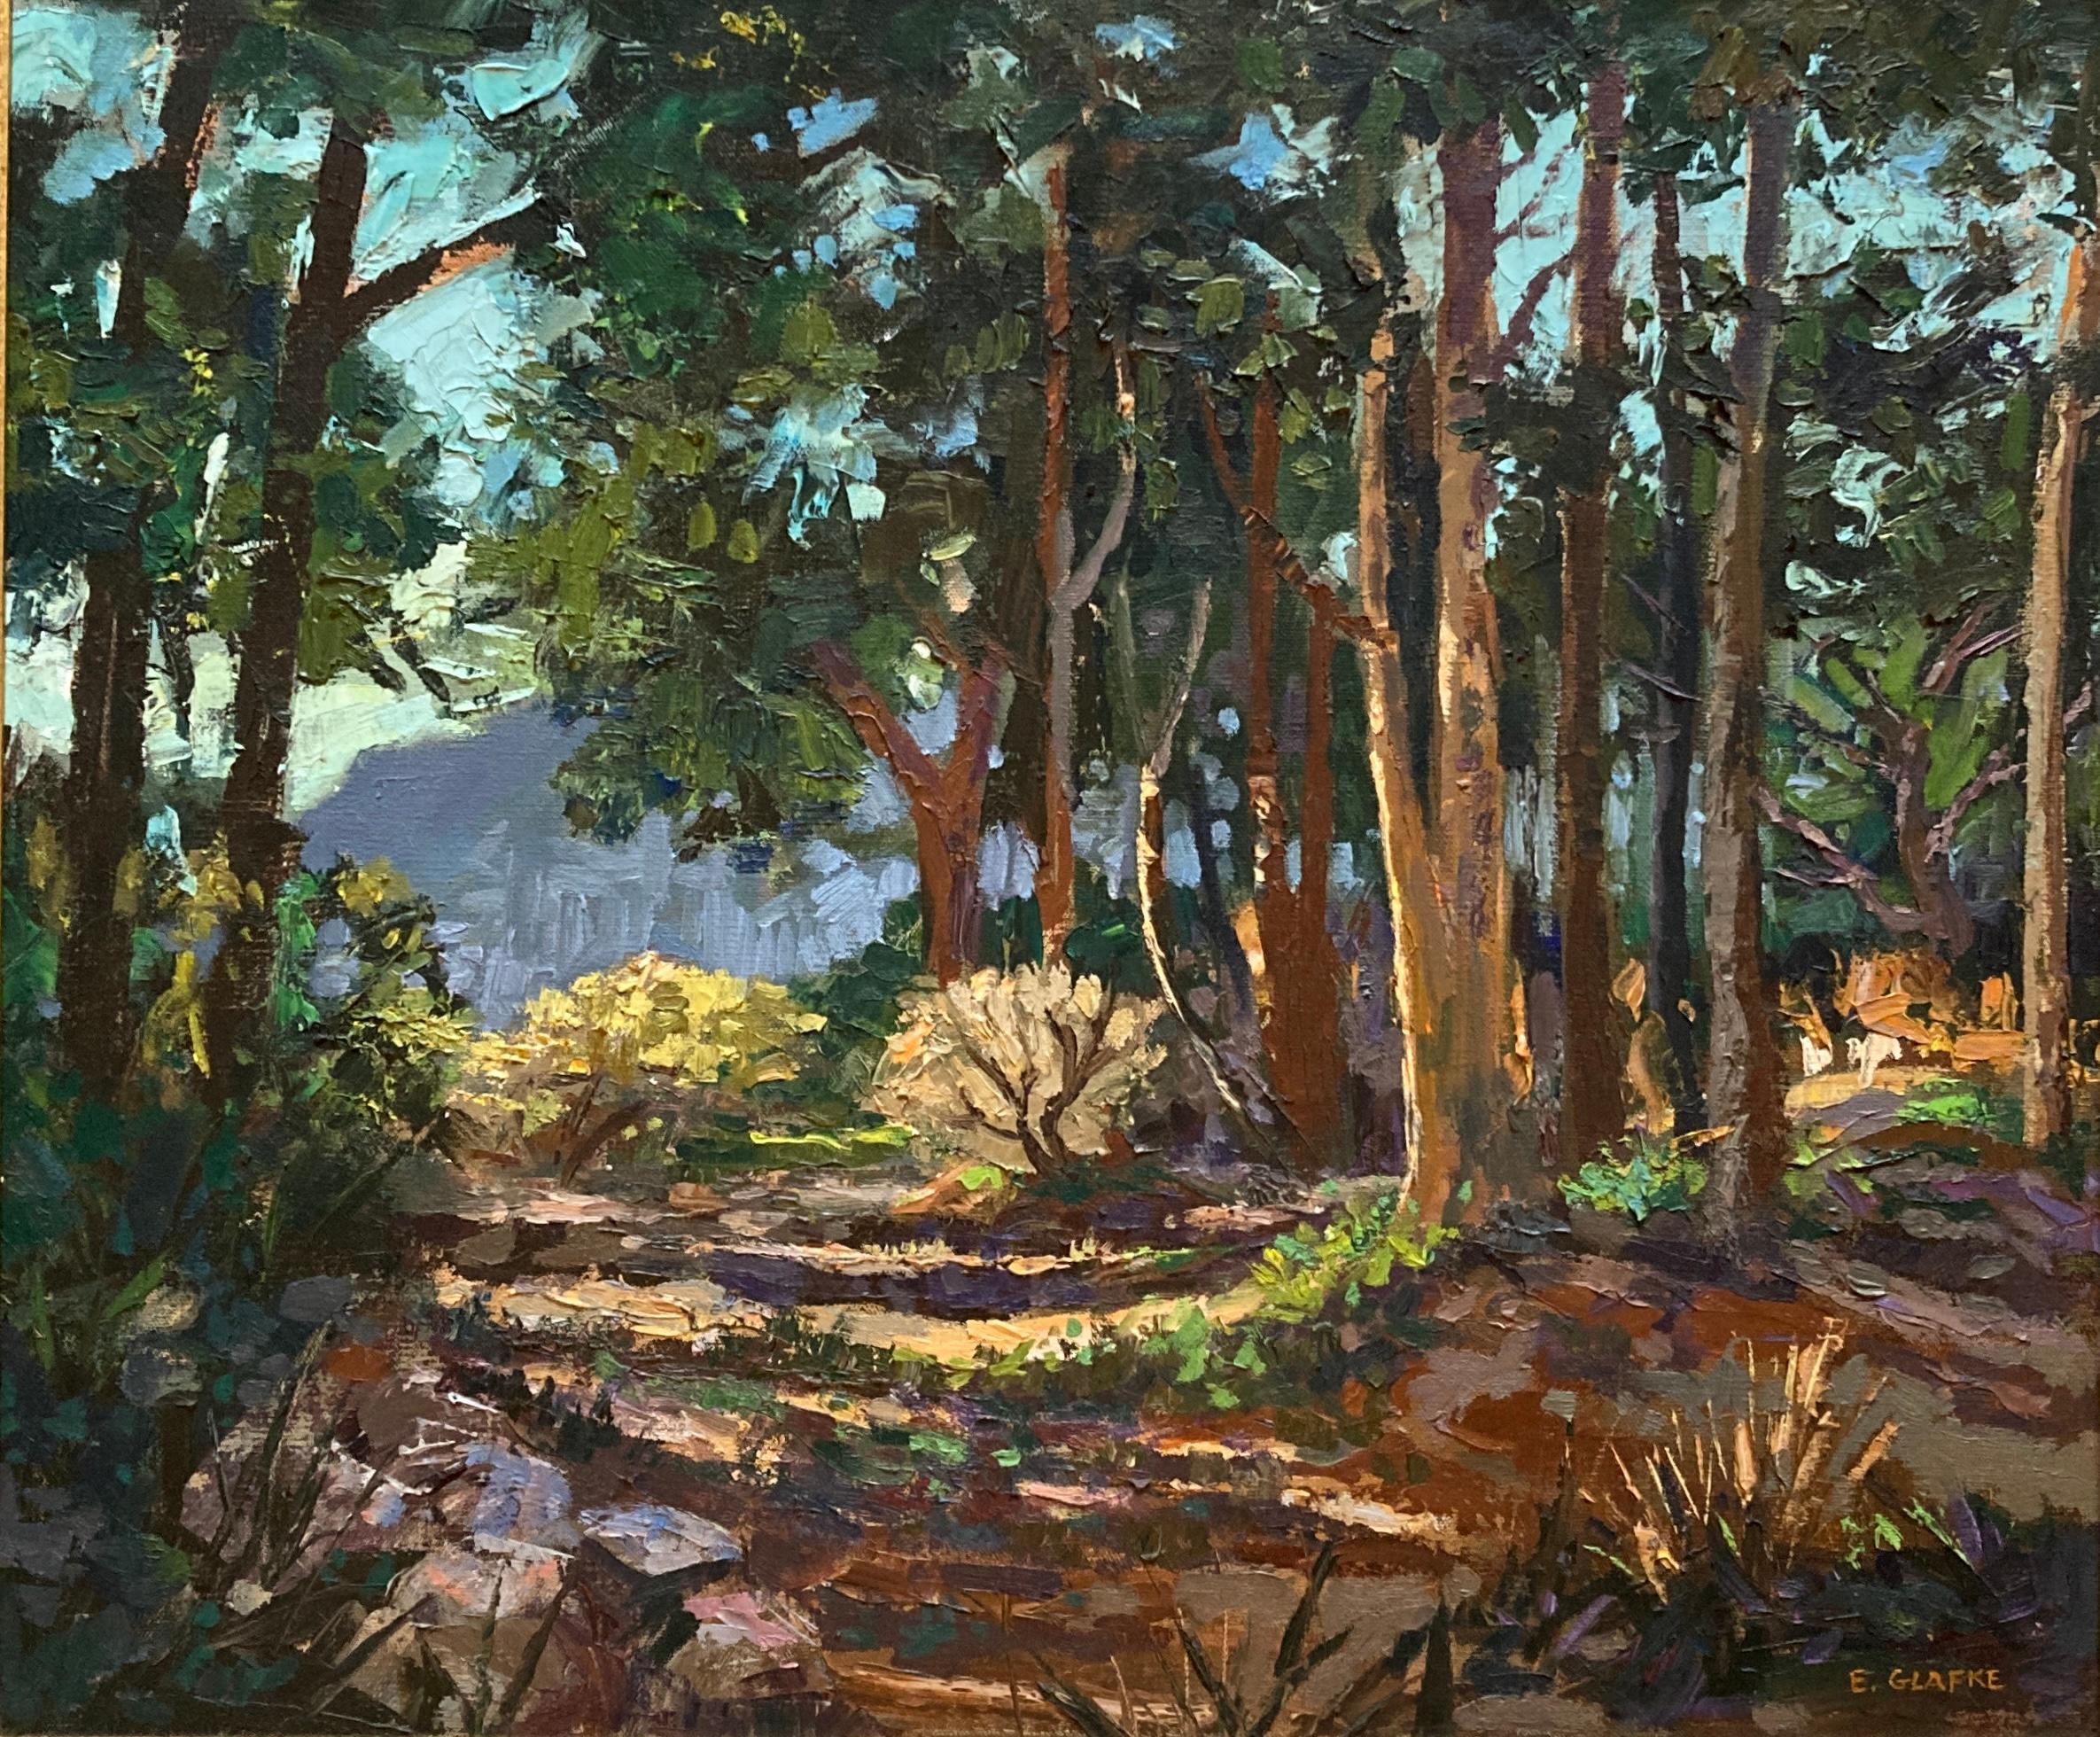 Edward Glafke (American, 1925-1997)
Tiburon Forest, 1990
Oil on canvas
Signed 'E. Glafke' lower right
Verso with handwritten title, date and signature
Canvas: 24in L x 20.5in H
In an vintage giltwood frame: 28in L x 24.5in x 2in D
Edward Glafke was